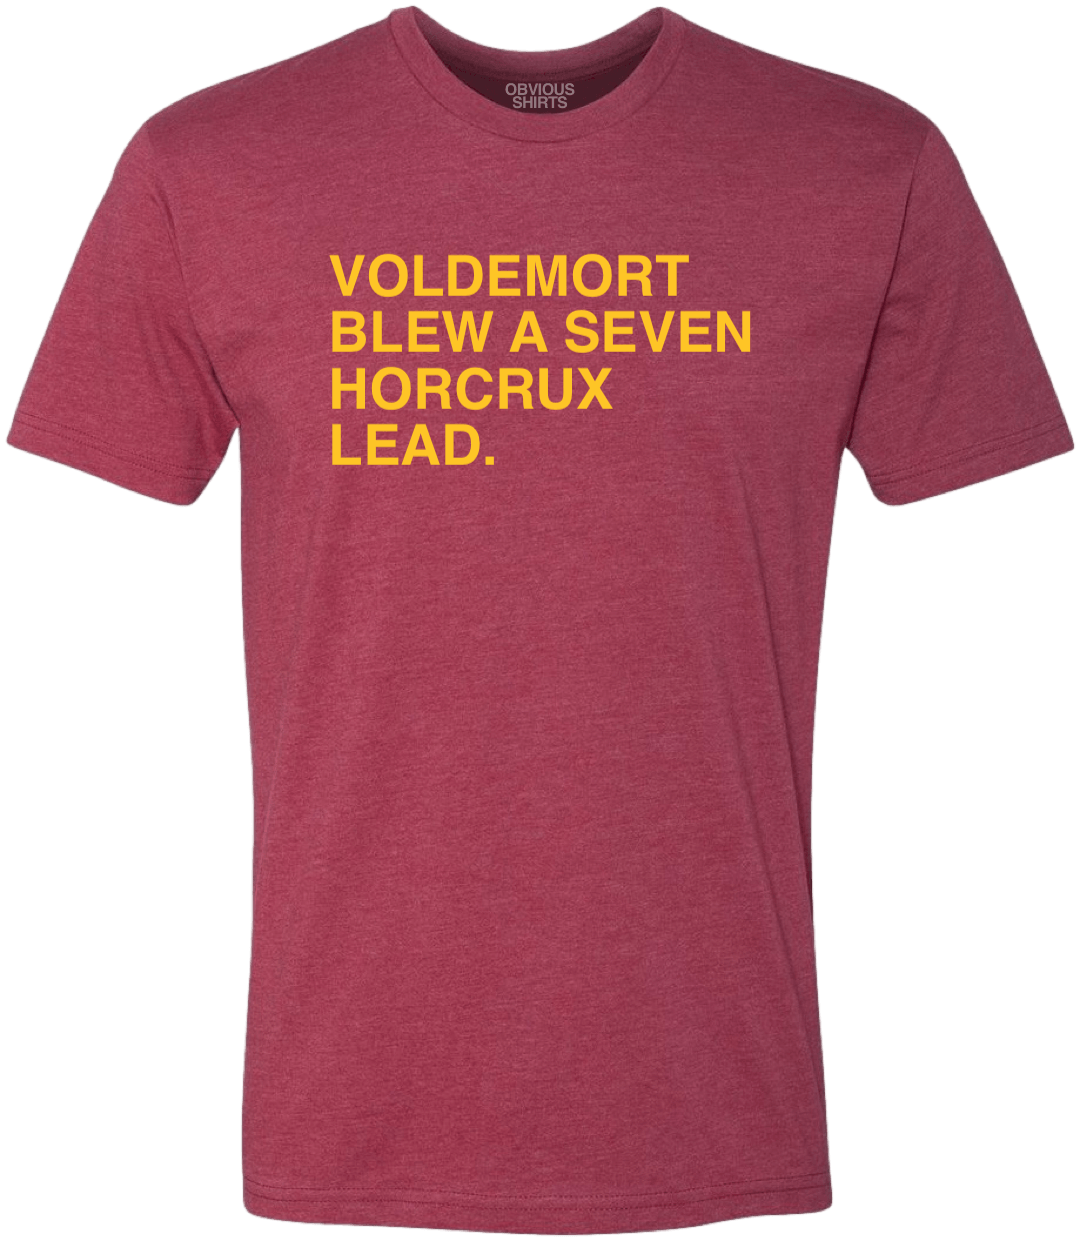 VOLDEMORT BLEW A SEVEN HORCRUX LEAD. (RED & GOLD) - OBVIOUS SHIRTS